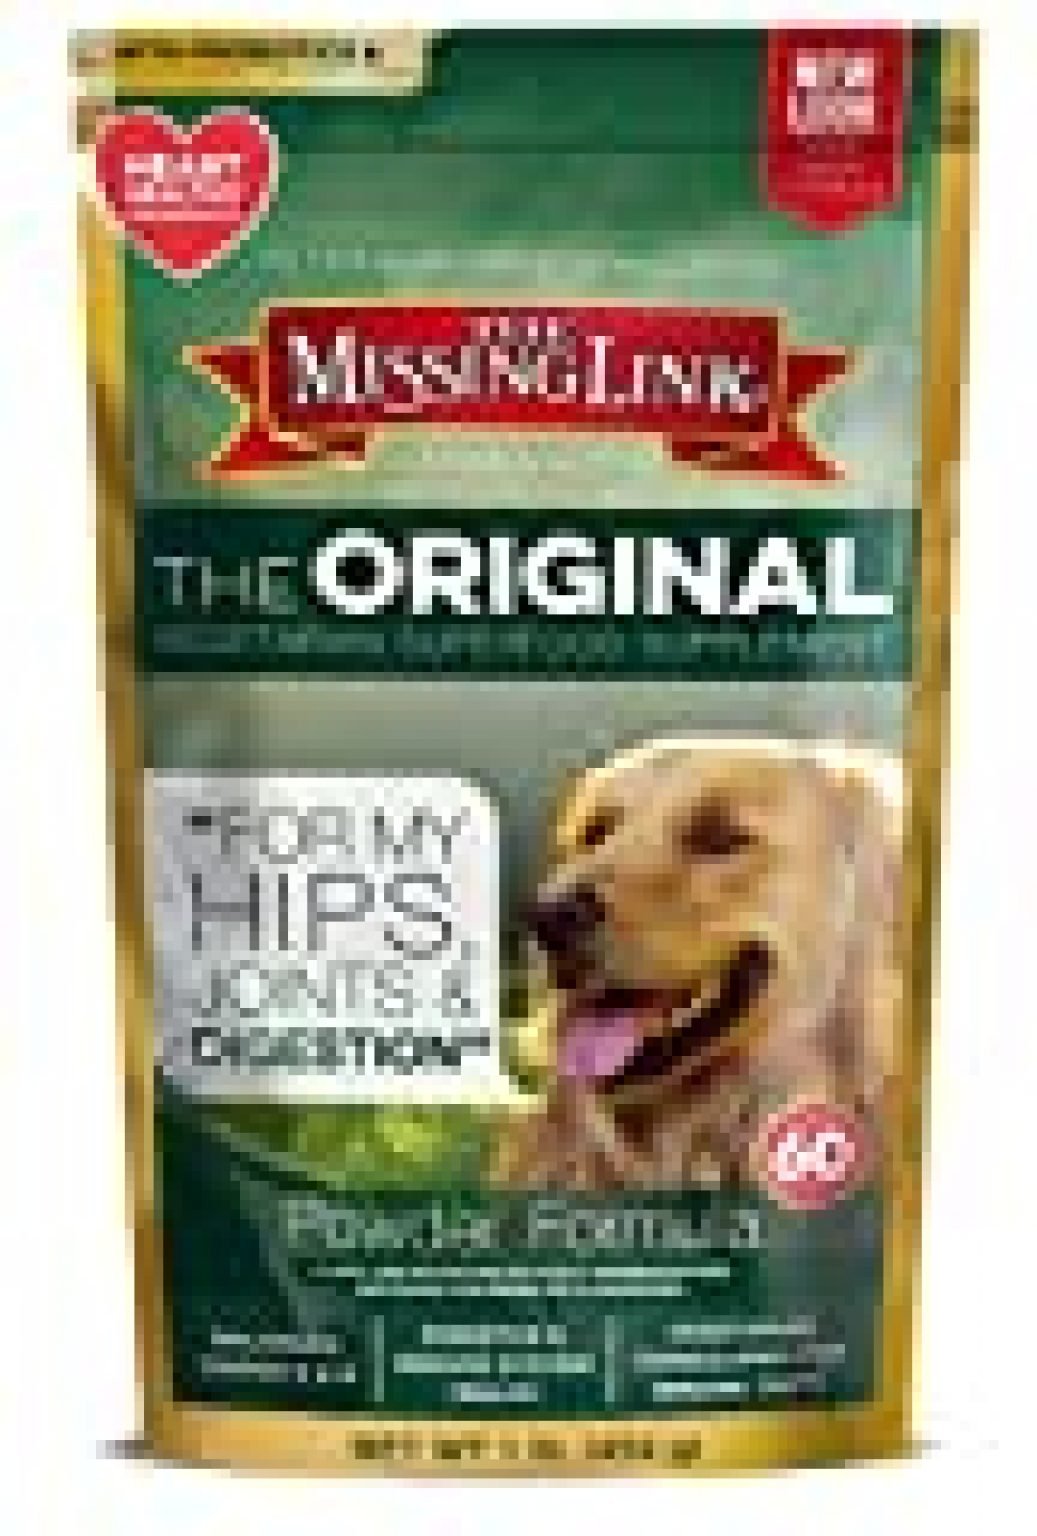 the missing link dog supplement reviews